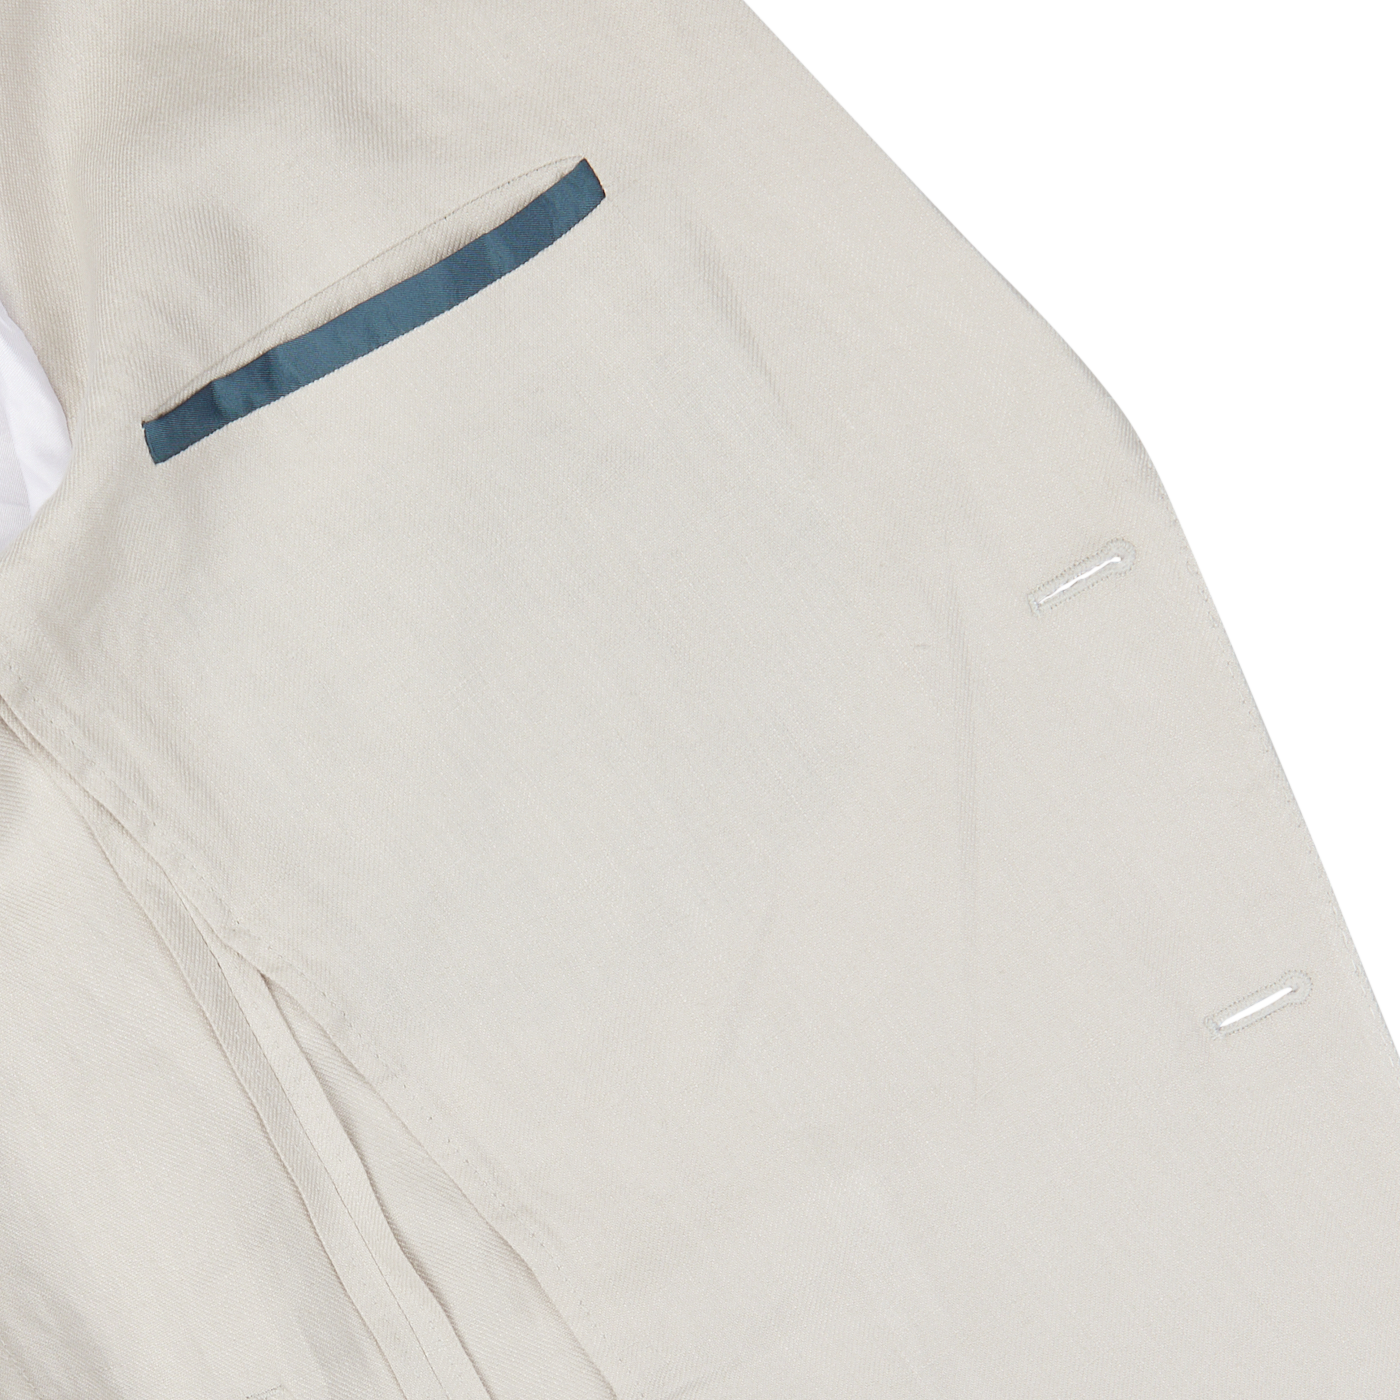 Pure light-colored Boglioli K.Jacket in Light Beige Washed Irish Linen with a chest pocket detail on a white background.